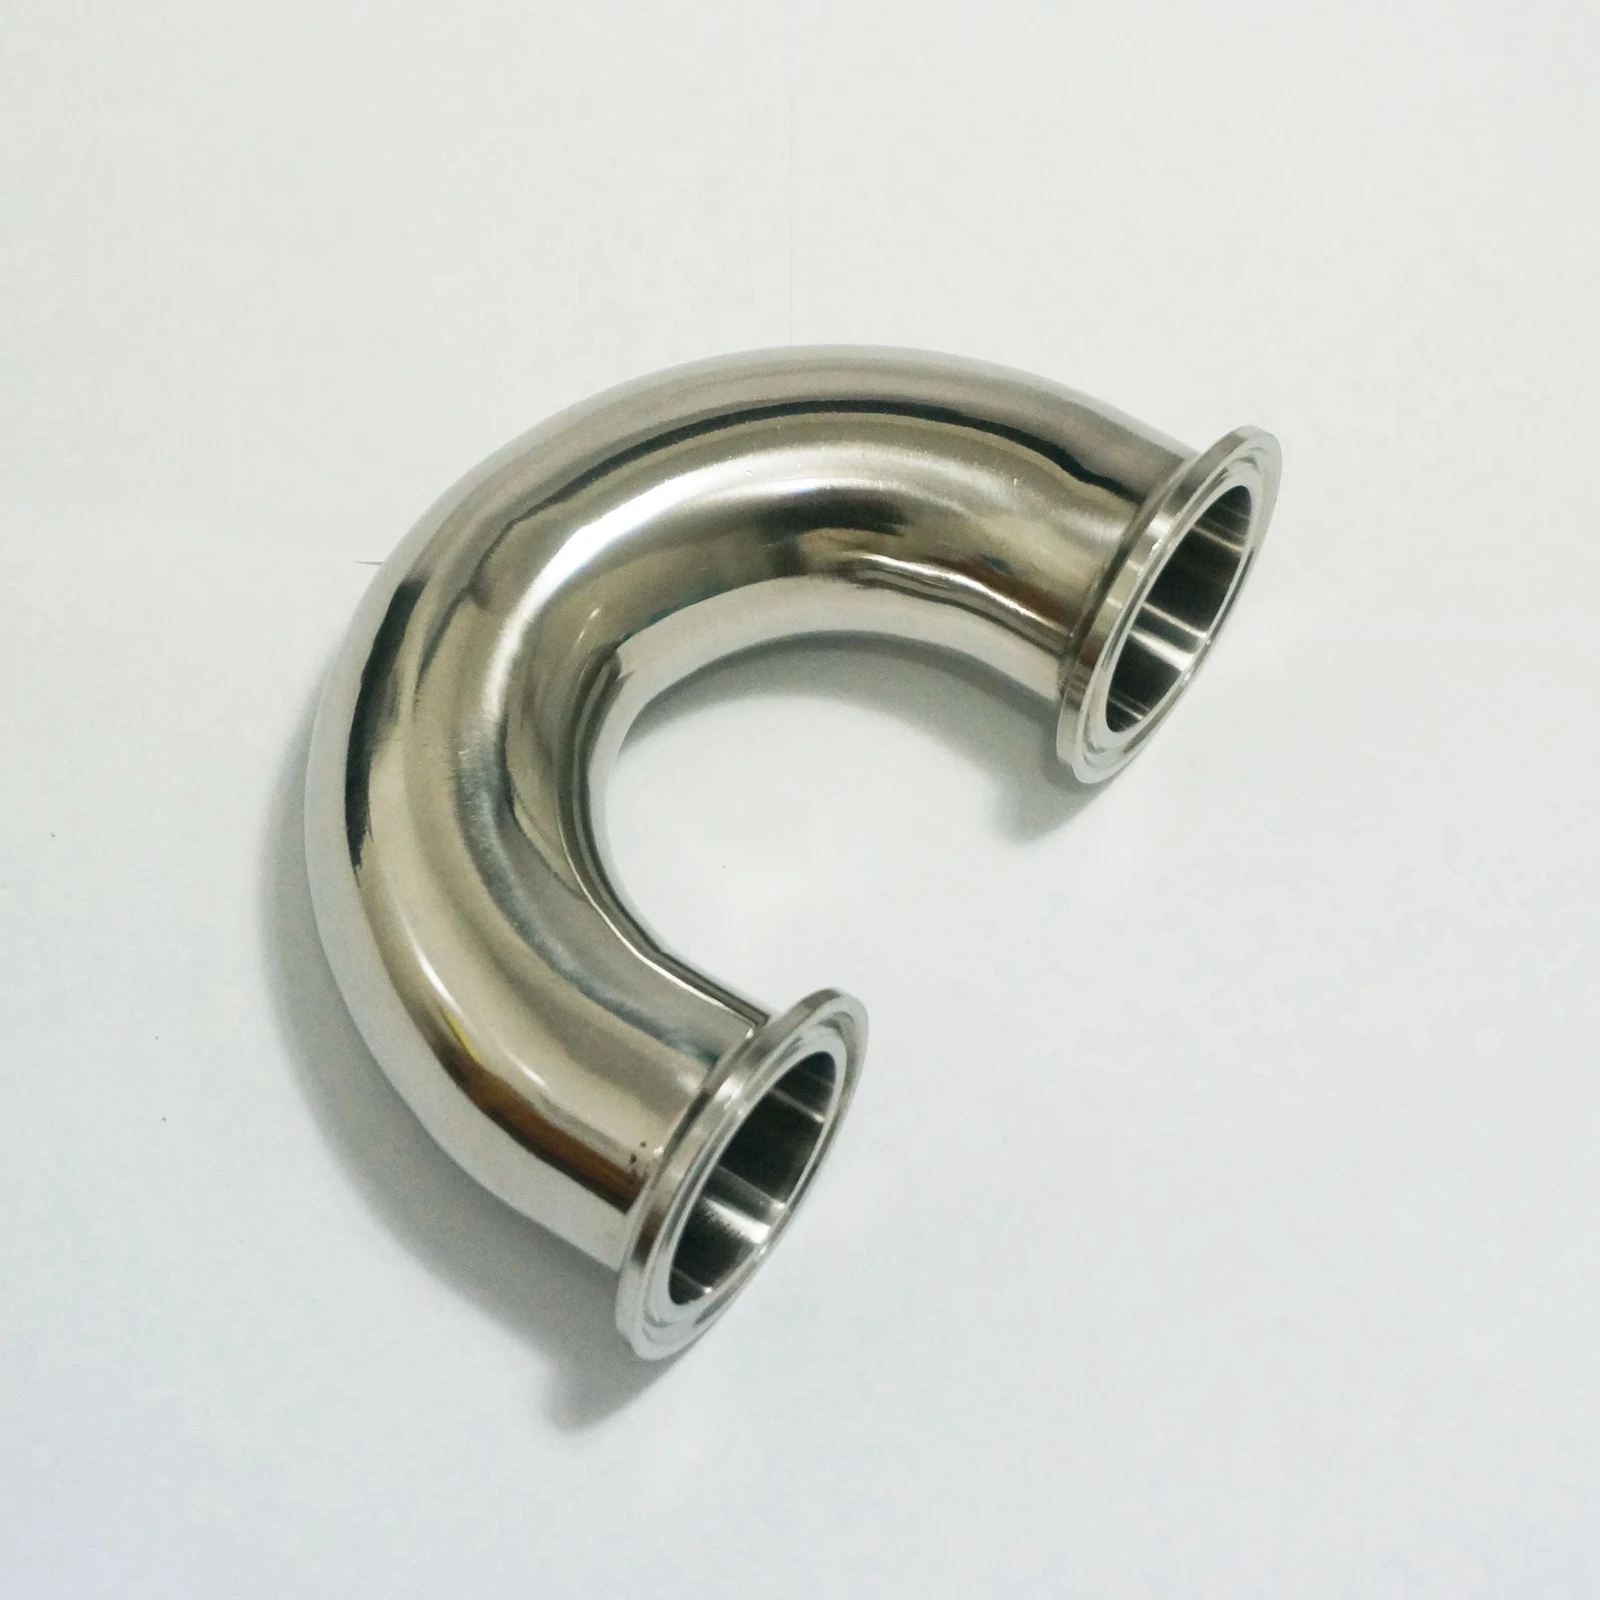 

Fit Tube O.D 38mm Ferrule OD 50.5mm 304 Stainless Steel Sanitary Ferrule 180 Degree Elbow Pipe Fitting Tri Clamp